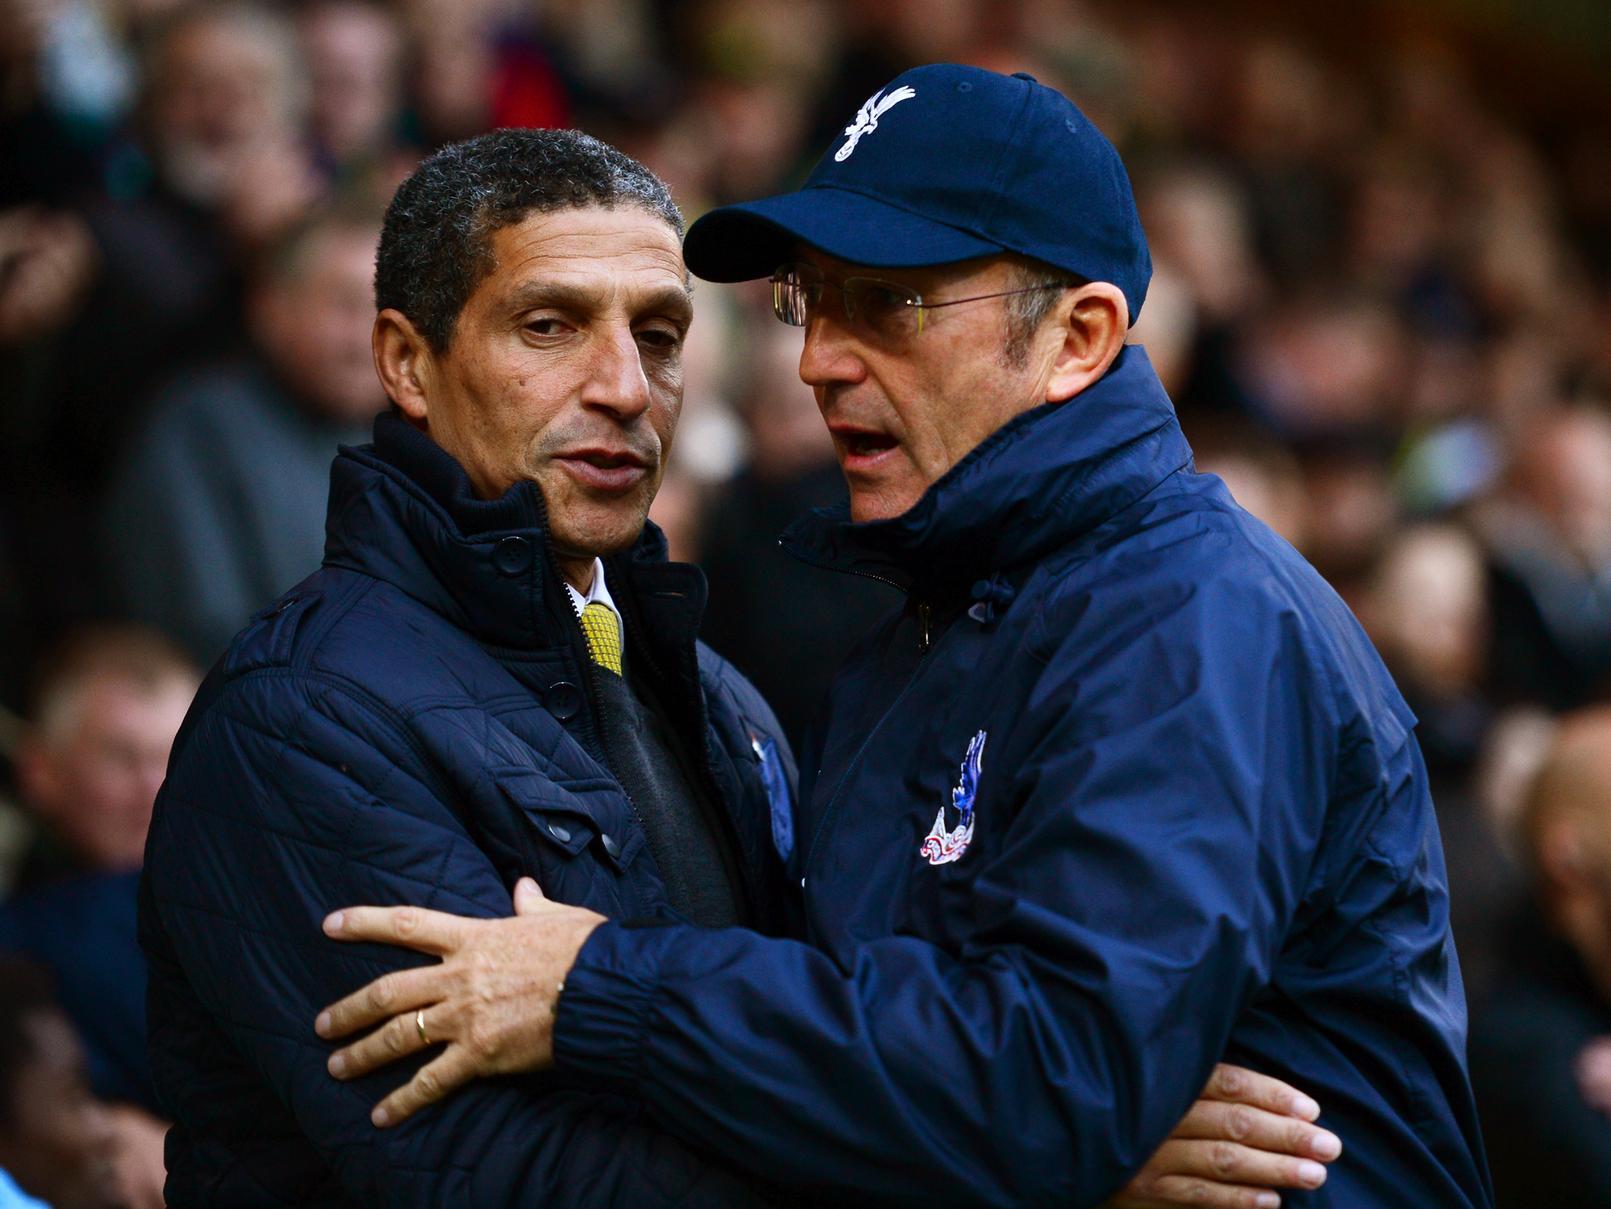 Tony Pulis has surged to the top of the bookies' odds to take the reins at Stoke City, but will need to fight off Chris Hughton and Michael O'Neill to seal his return to the club. (Sky Bet)